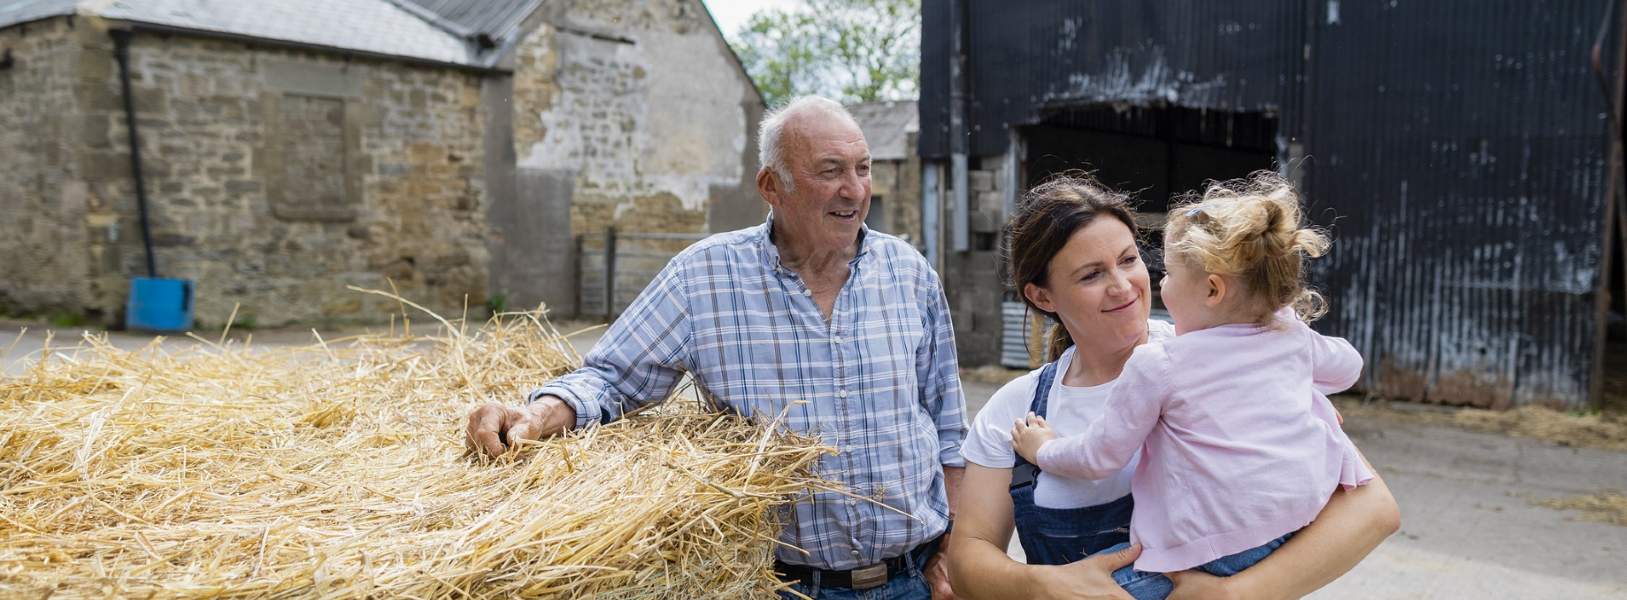 Farmers embrace the future to safeguard traditions of a thriving rural sector